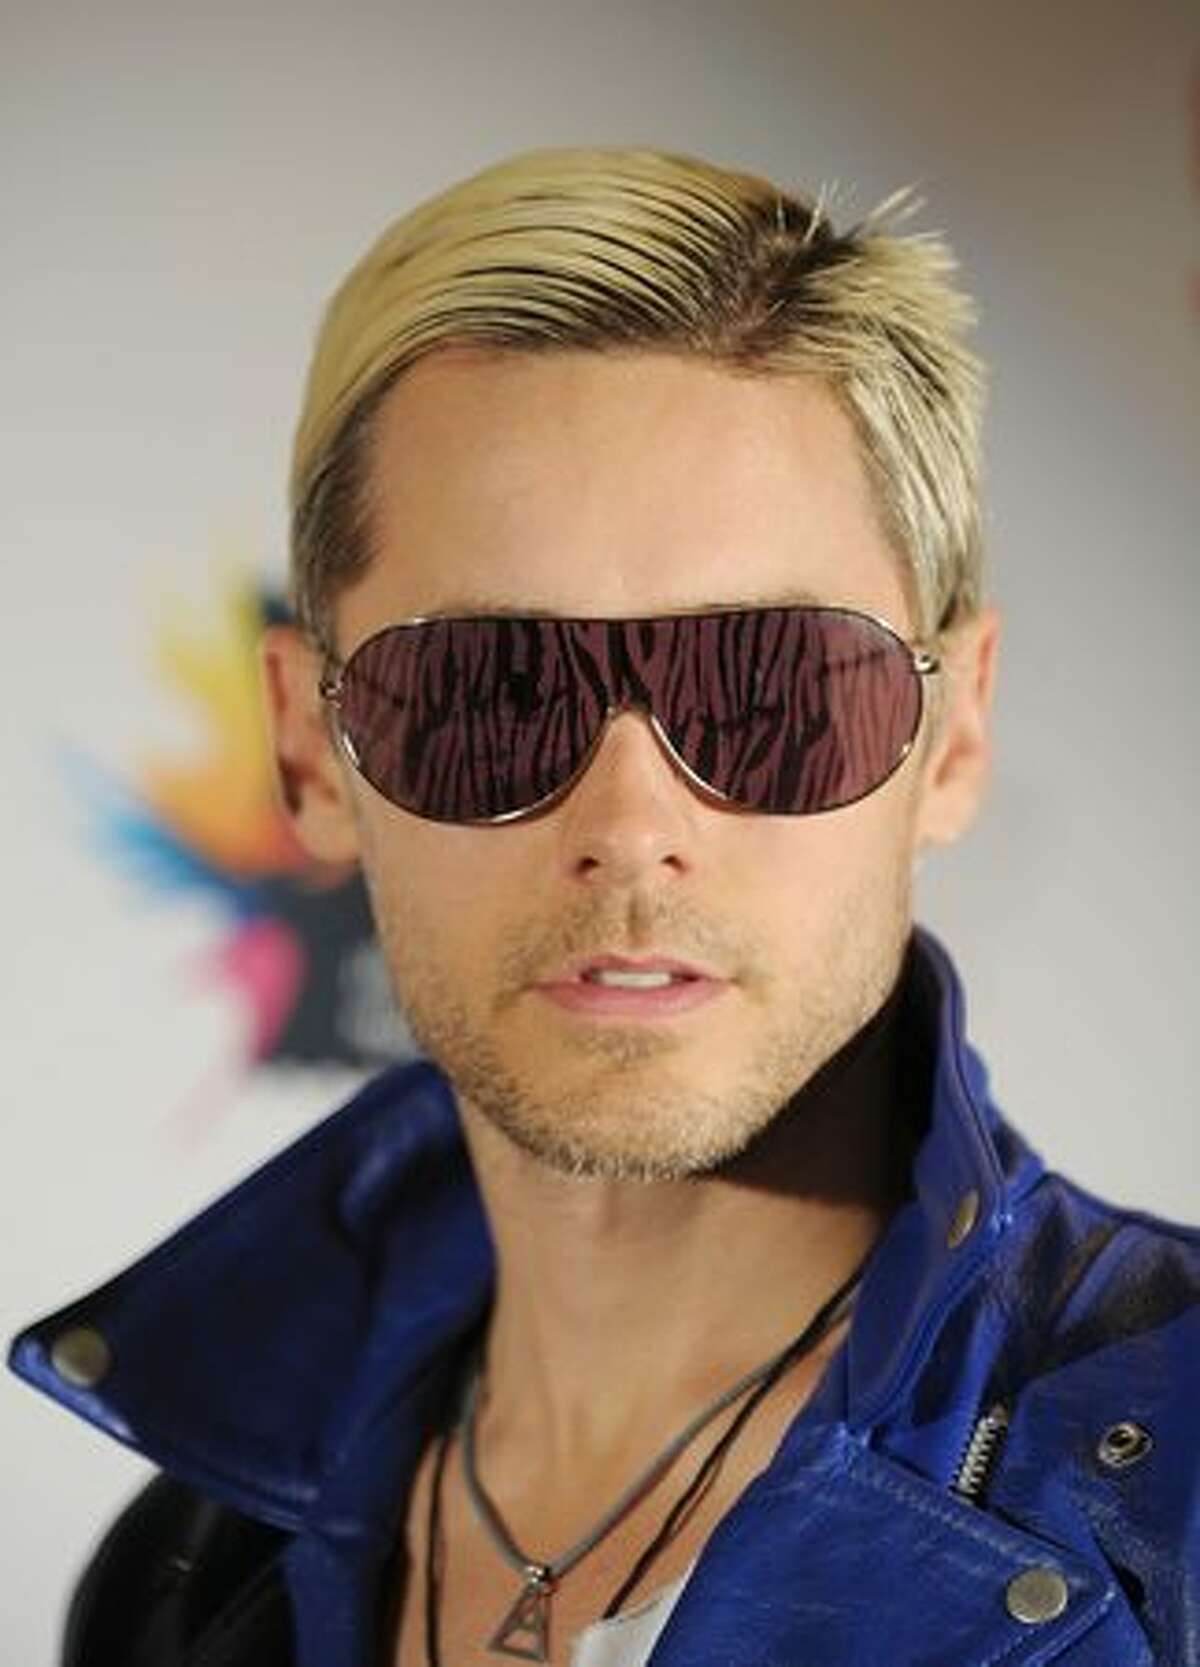 Singer and actor Jared Leto of 30 Seconds to Mars takes part in the 2010 MTV World Stages press conference in Mexico City, Mexico.